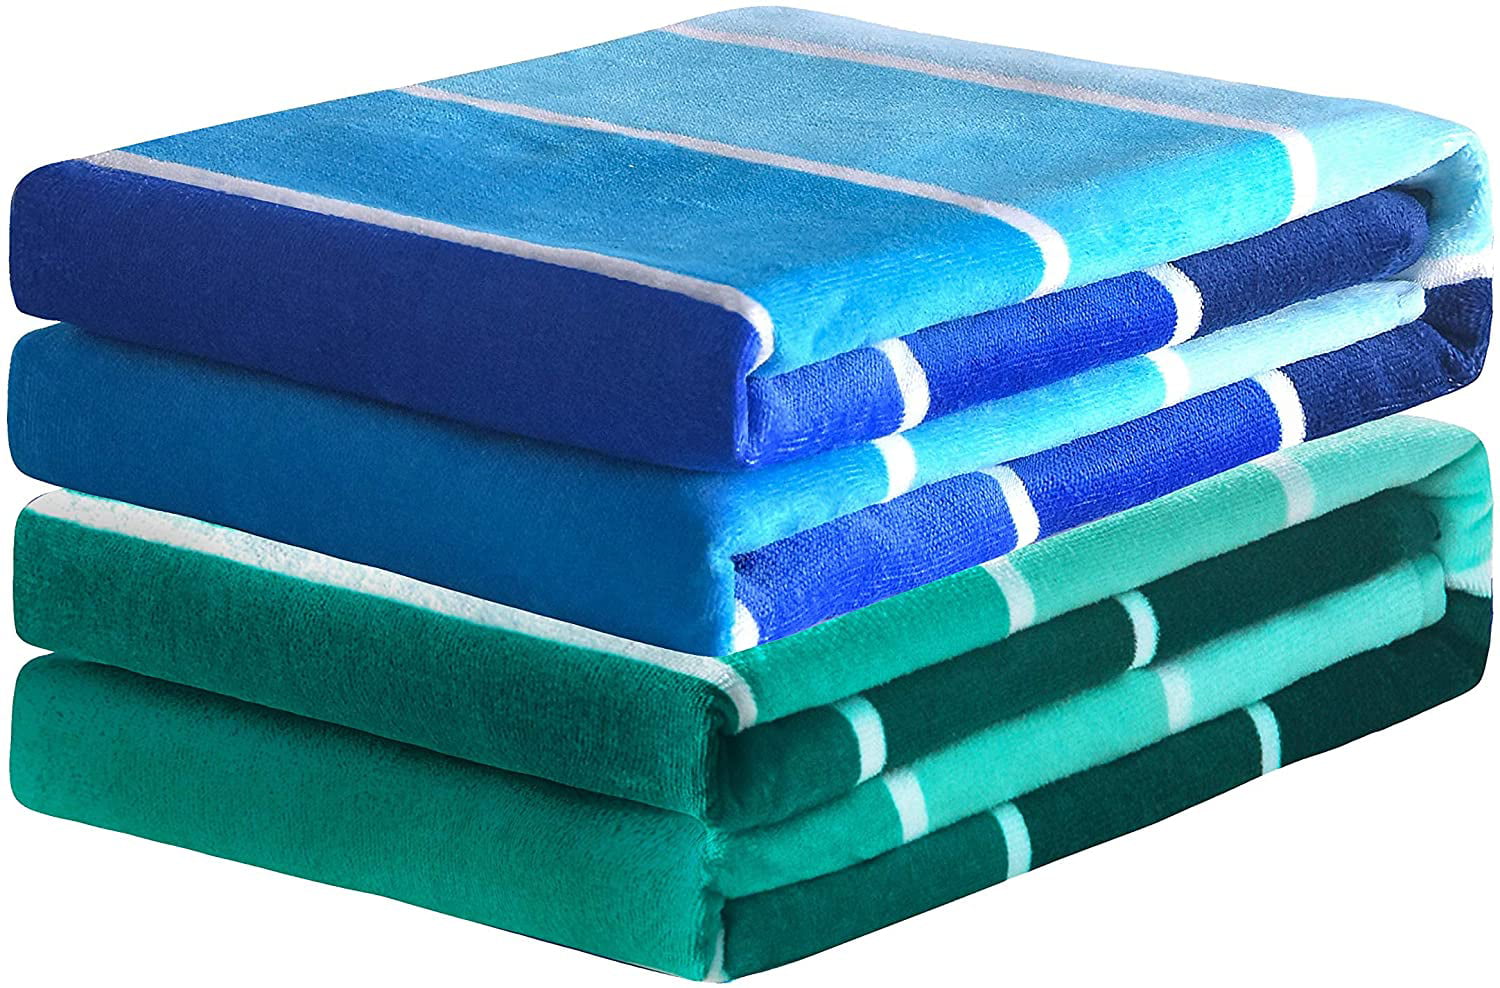 -Soft Absorbent and Plush 100% Cotton Beach Towel Quick Dry 30 x 60 Lightweight Pool Towel Gradient Blue Striped